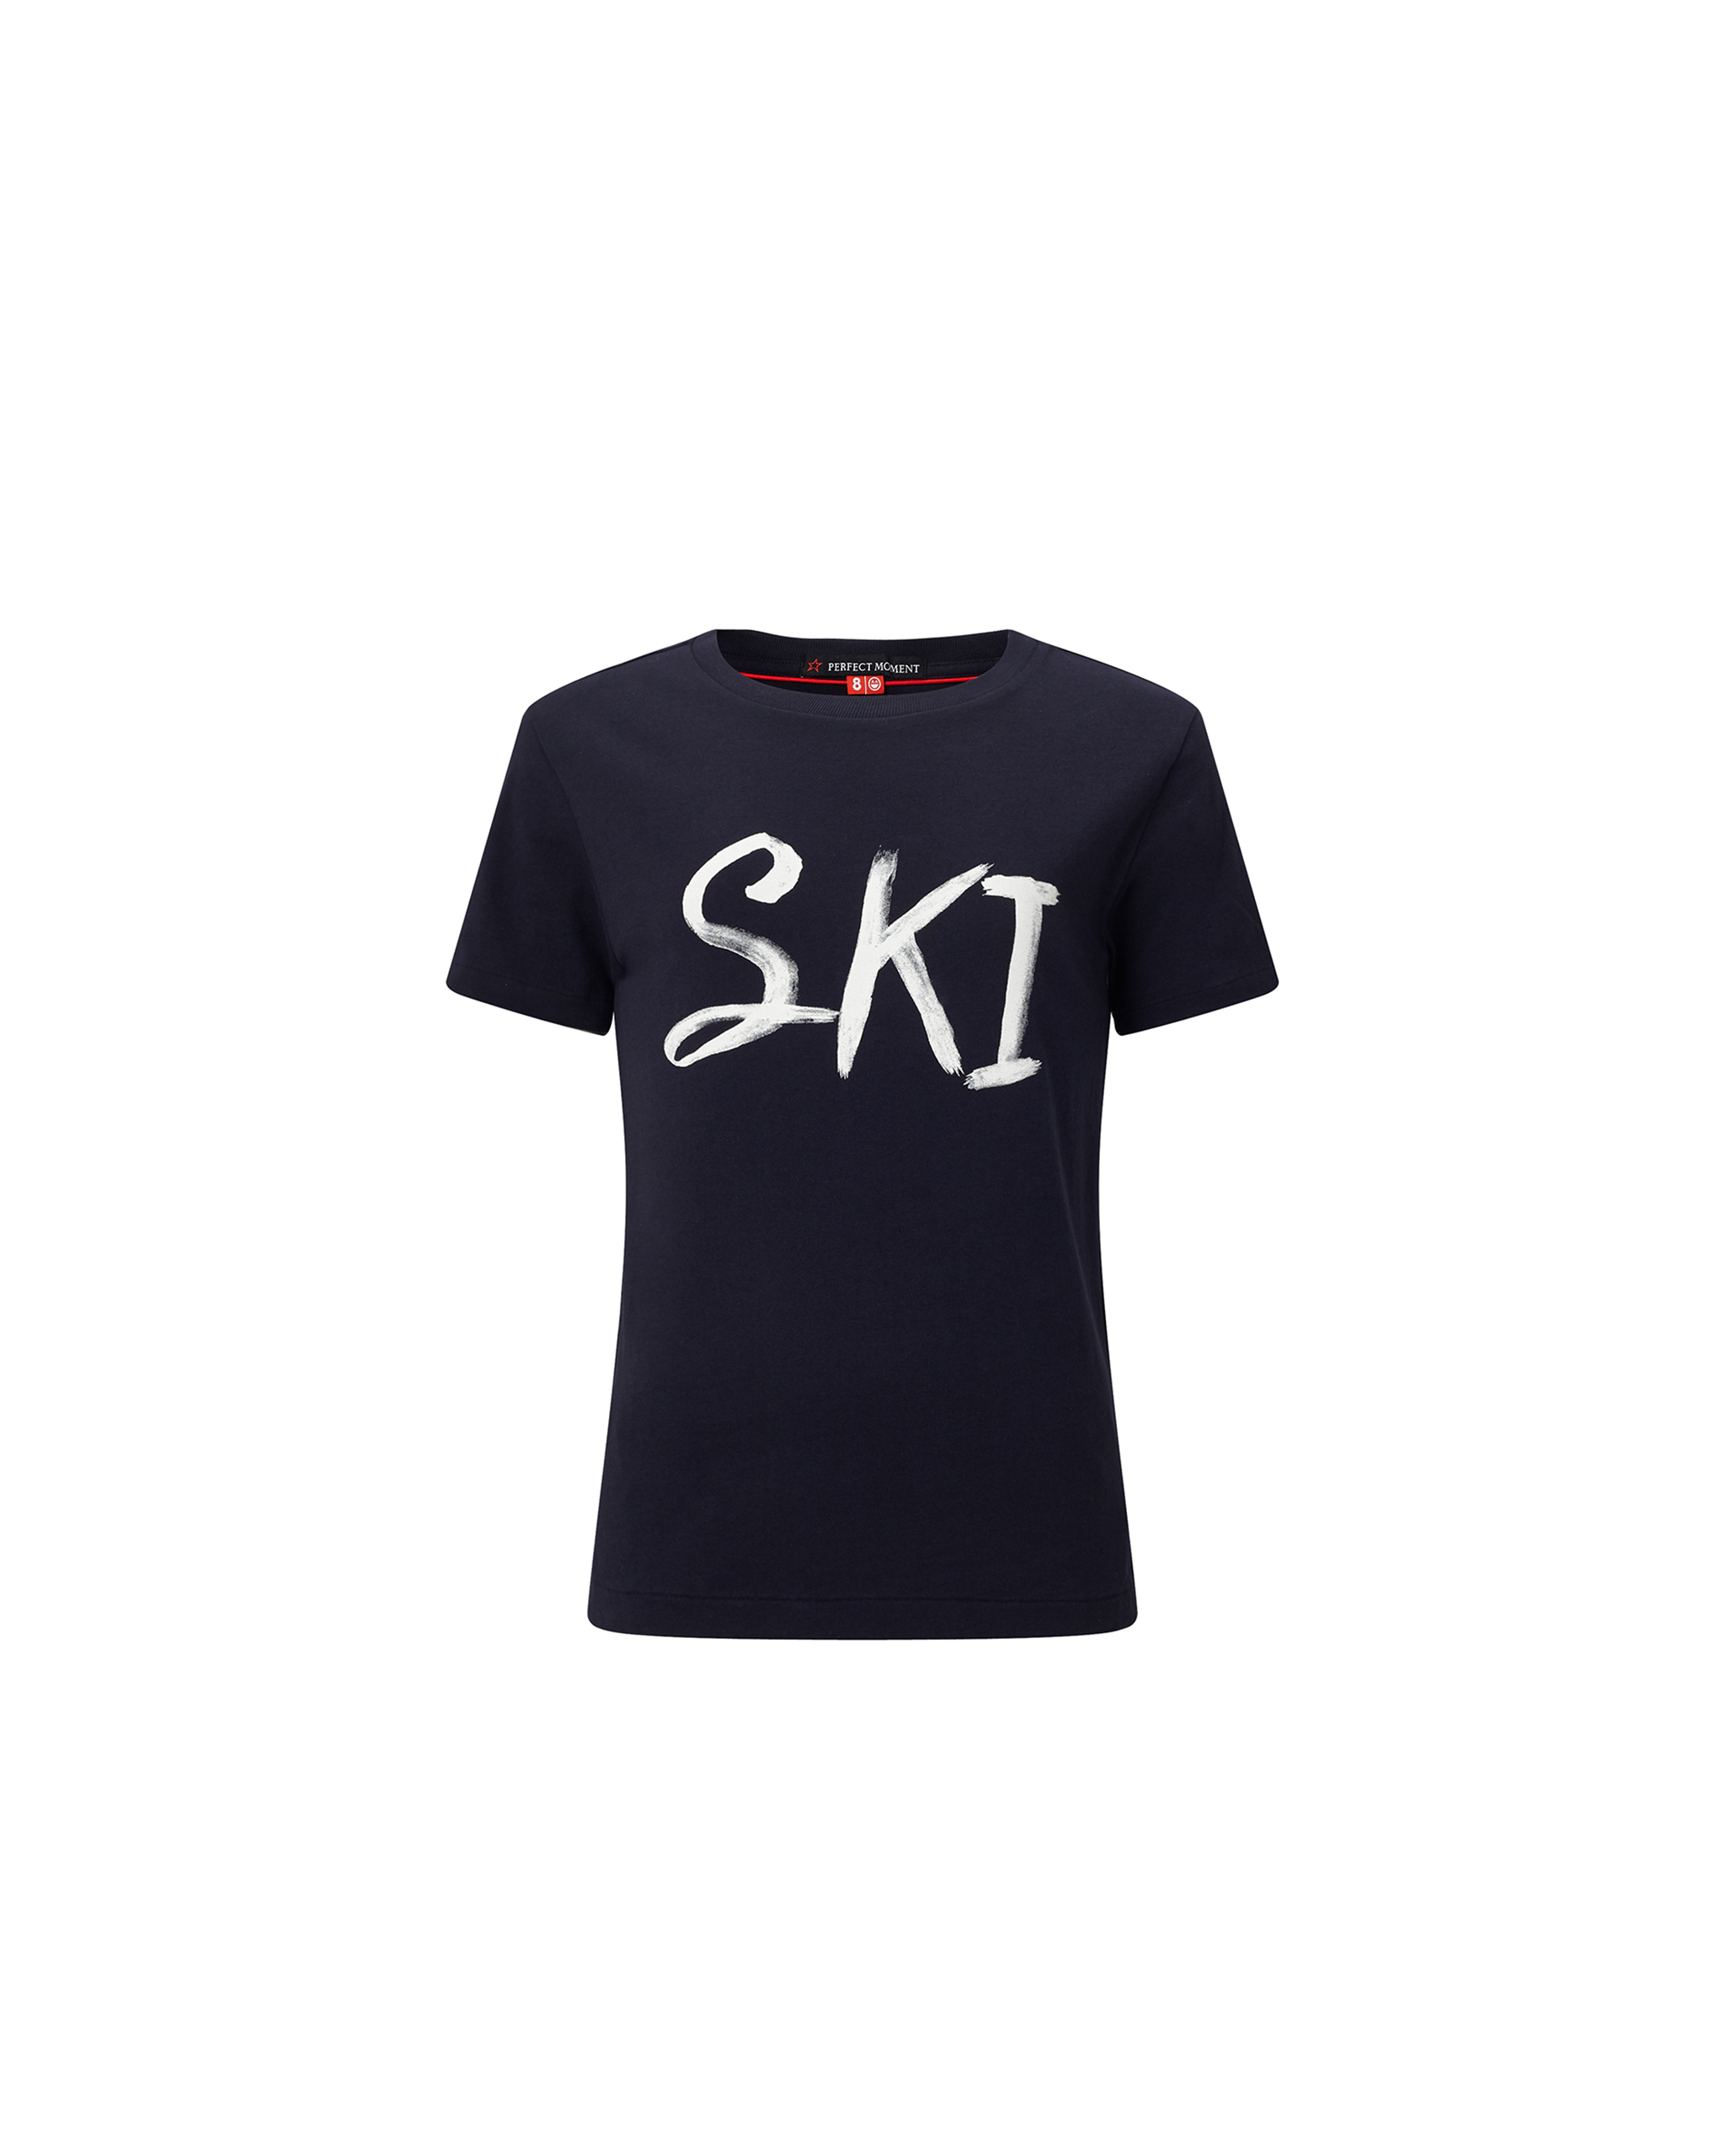 Perfect Moment Ski Tee Y6 In Navy